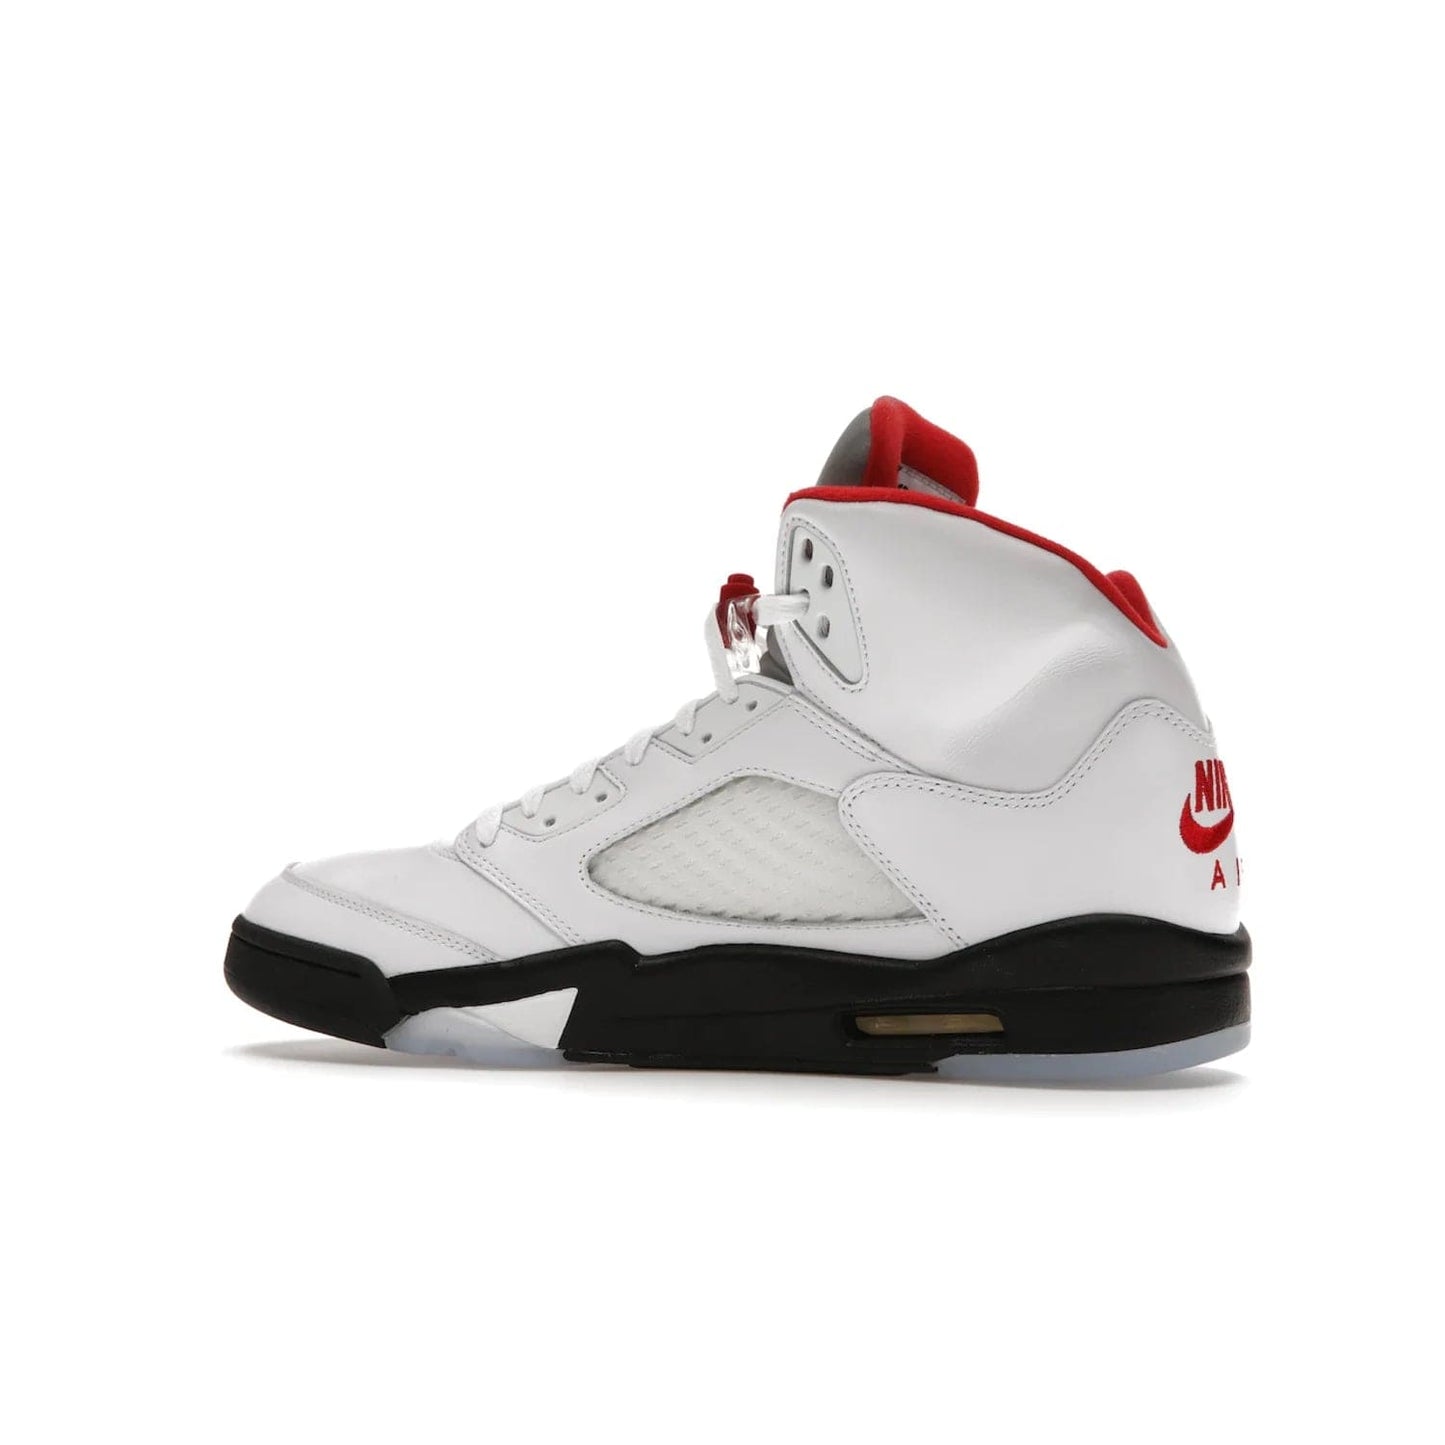 Jordan 5 Retro Fire Red Silver Tongue (2020) - Image 21 - Only at www.BallersClubKickz.com - Experience classic styling with the Jordan 5 Retro Fire Red Silver Tongue (2020). Features a white leather upper, 3M reflective tongue, midsole colorblocking, and an icy translucent outsole. Now available, upgrade your shoe collection today.